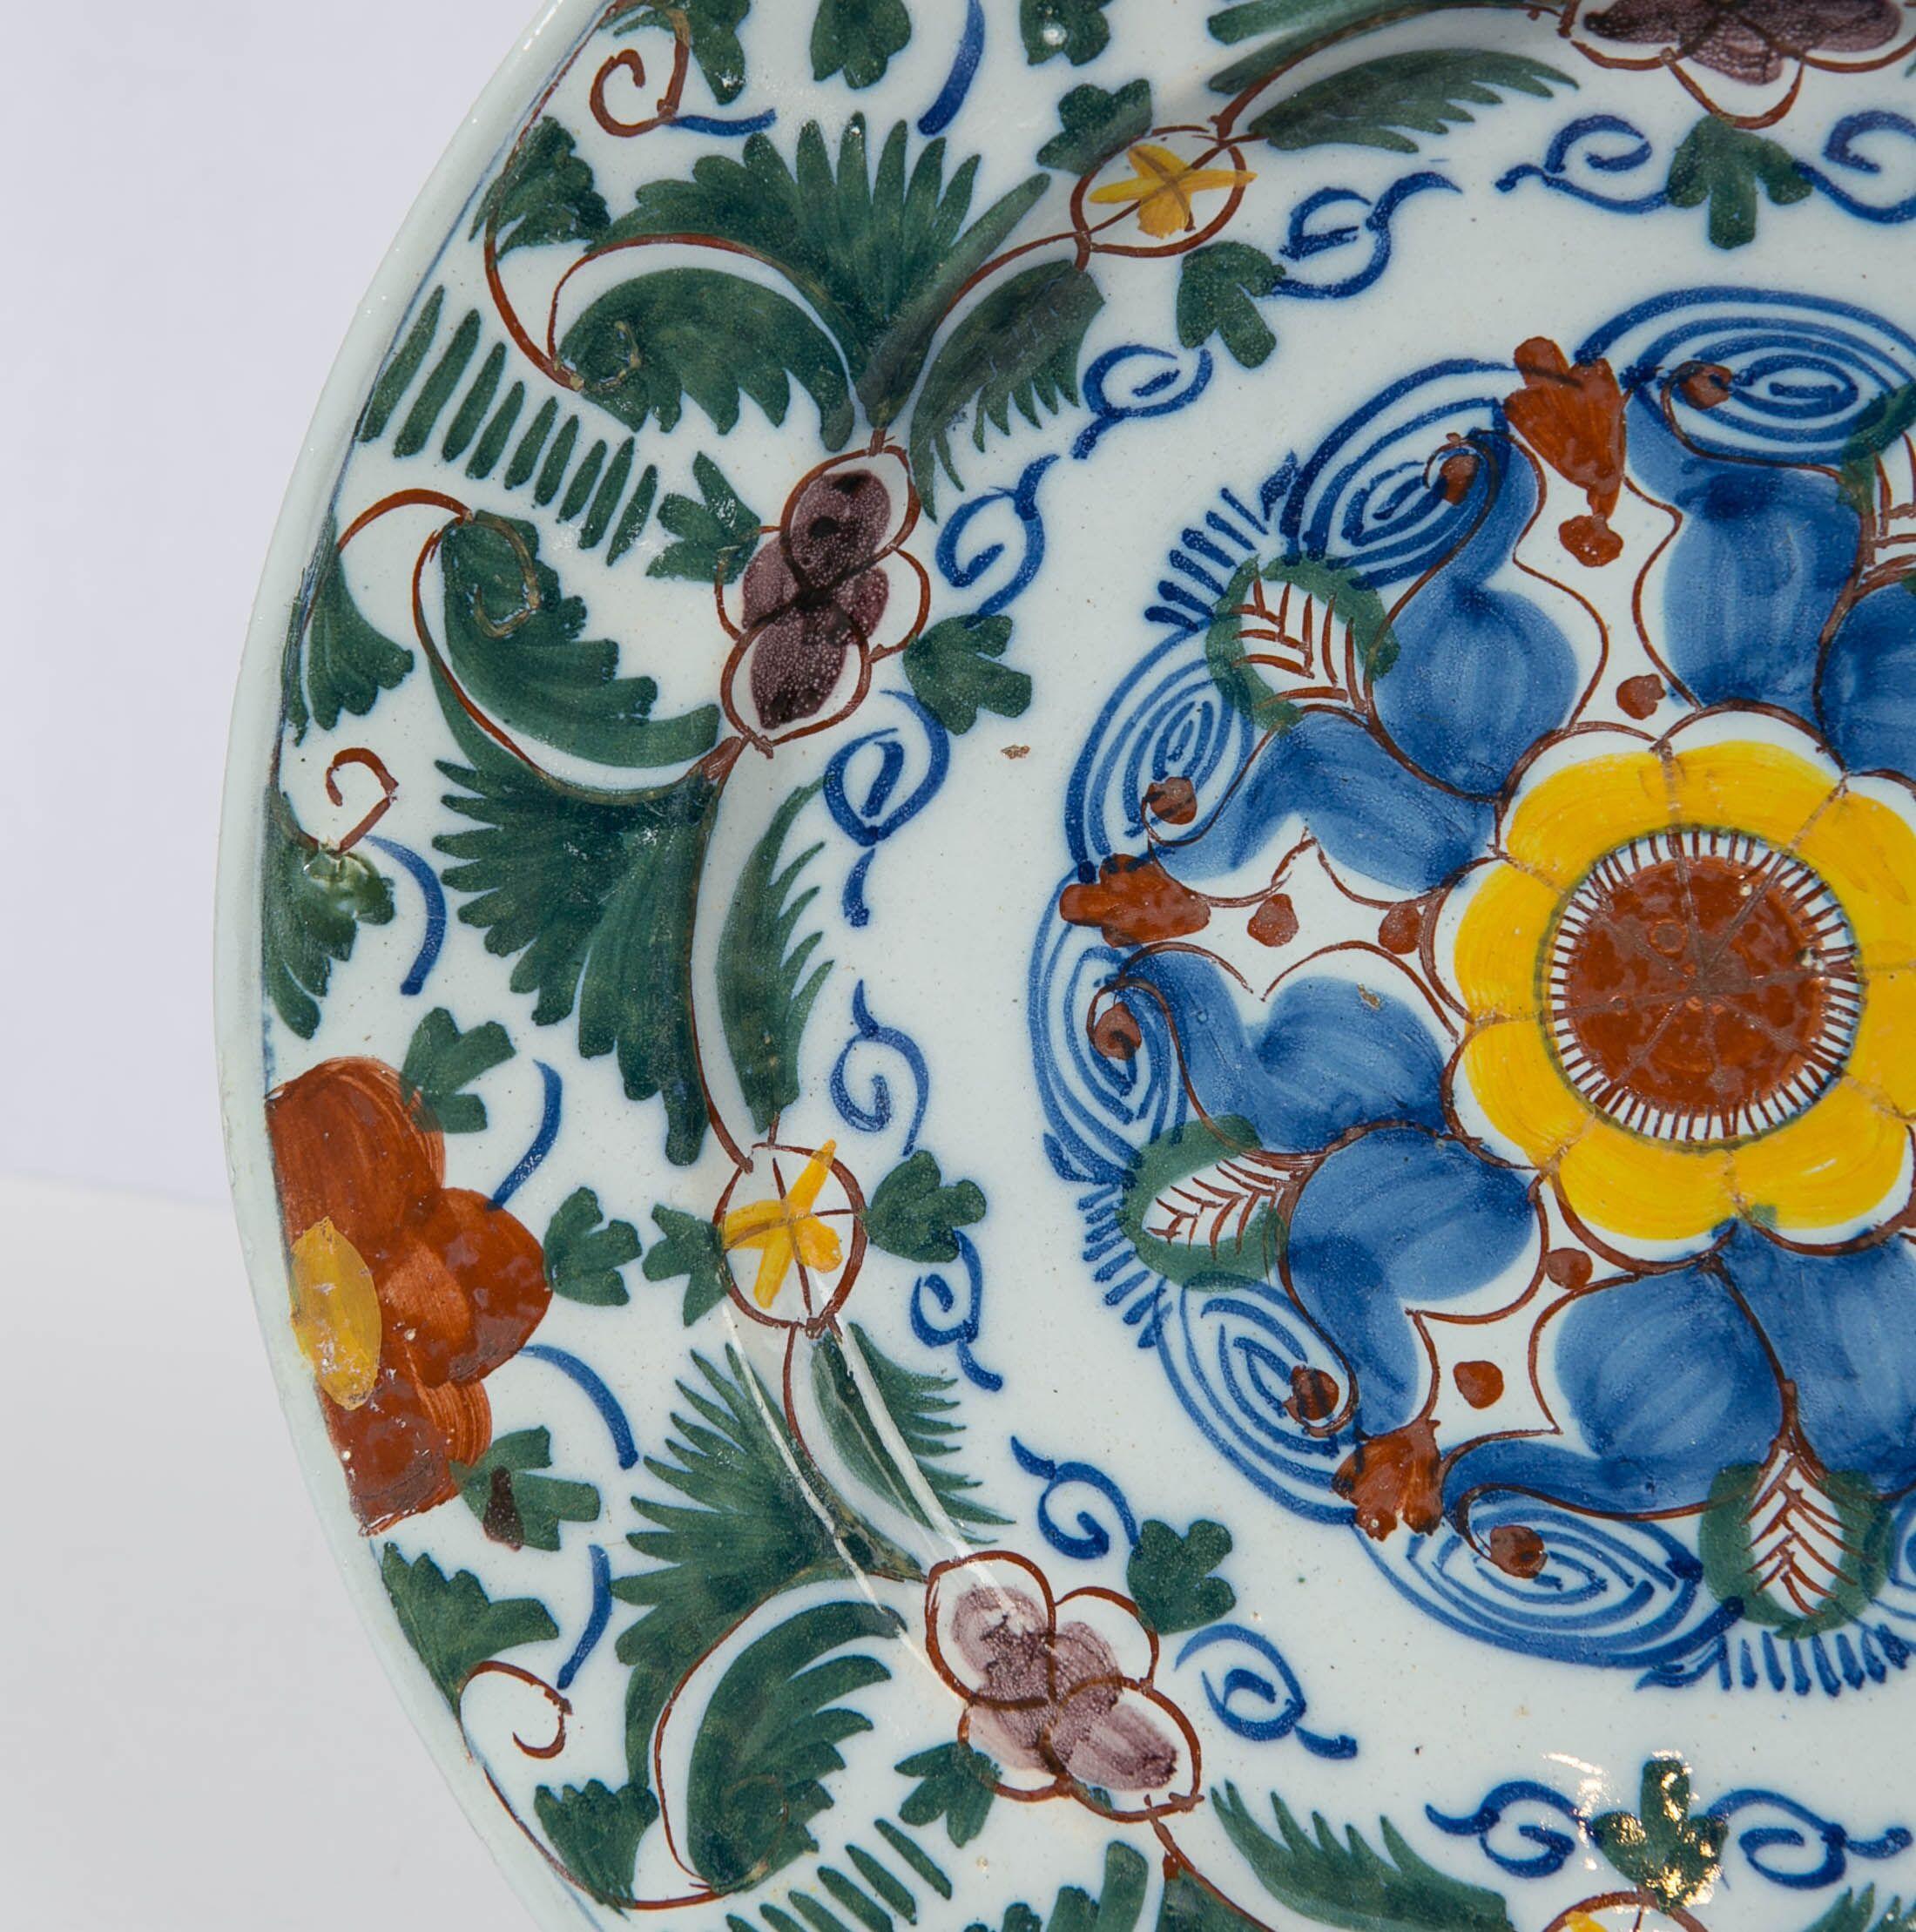 We are proud to offer this 18th-century Dutch Delft charger hand-painted with a burst of polychrome colors: green, blue, orange, and yellow. The colors are painted over the glaze except for the cobalt blue, which is brushed under the glaze. This